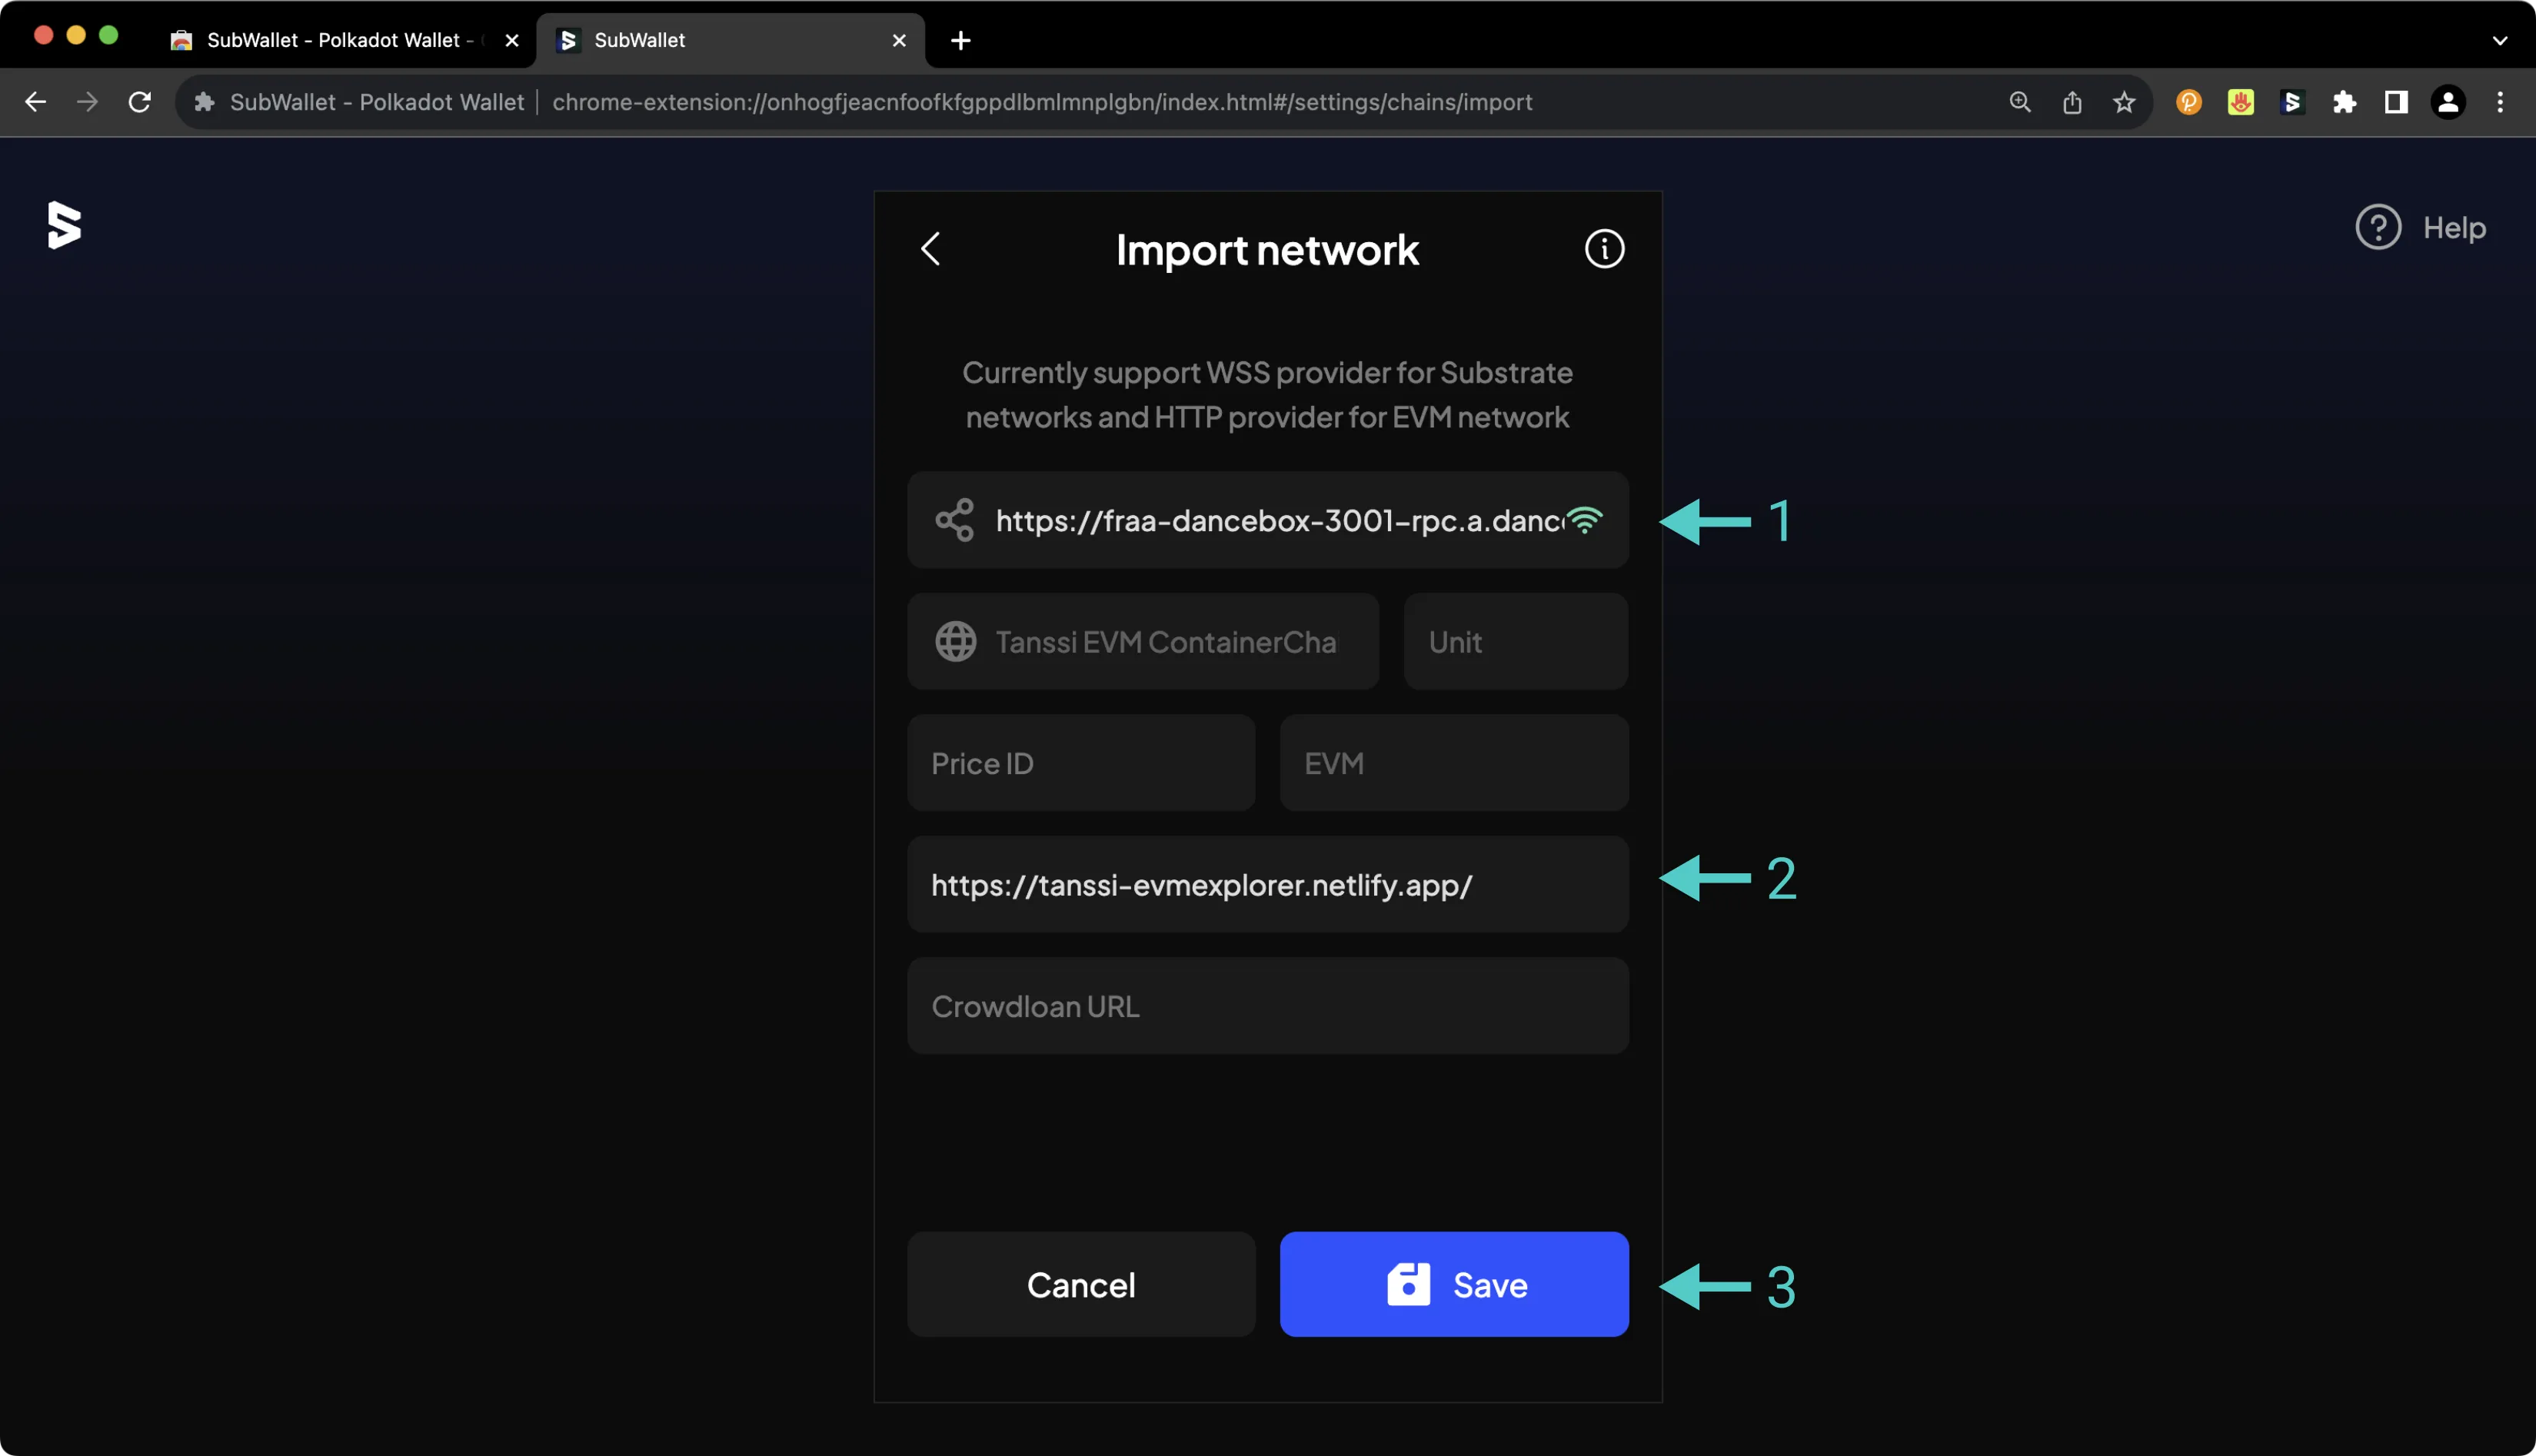 Add your Tanssi Appchain Network Details in SubWallet